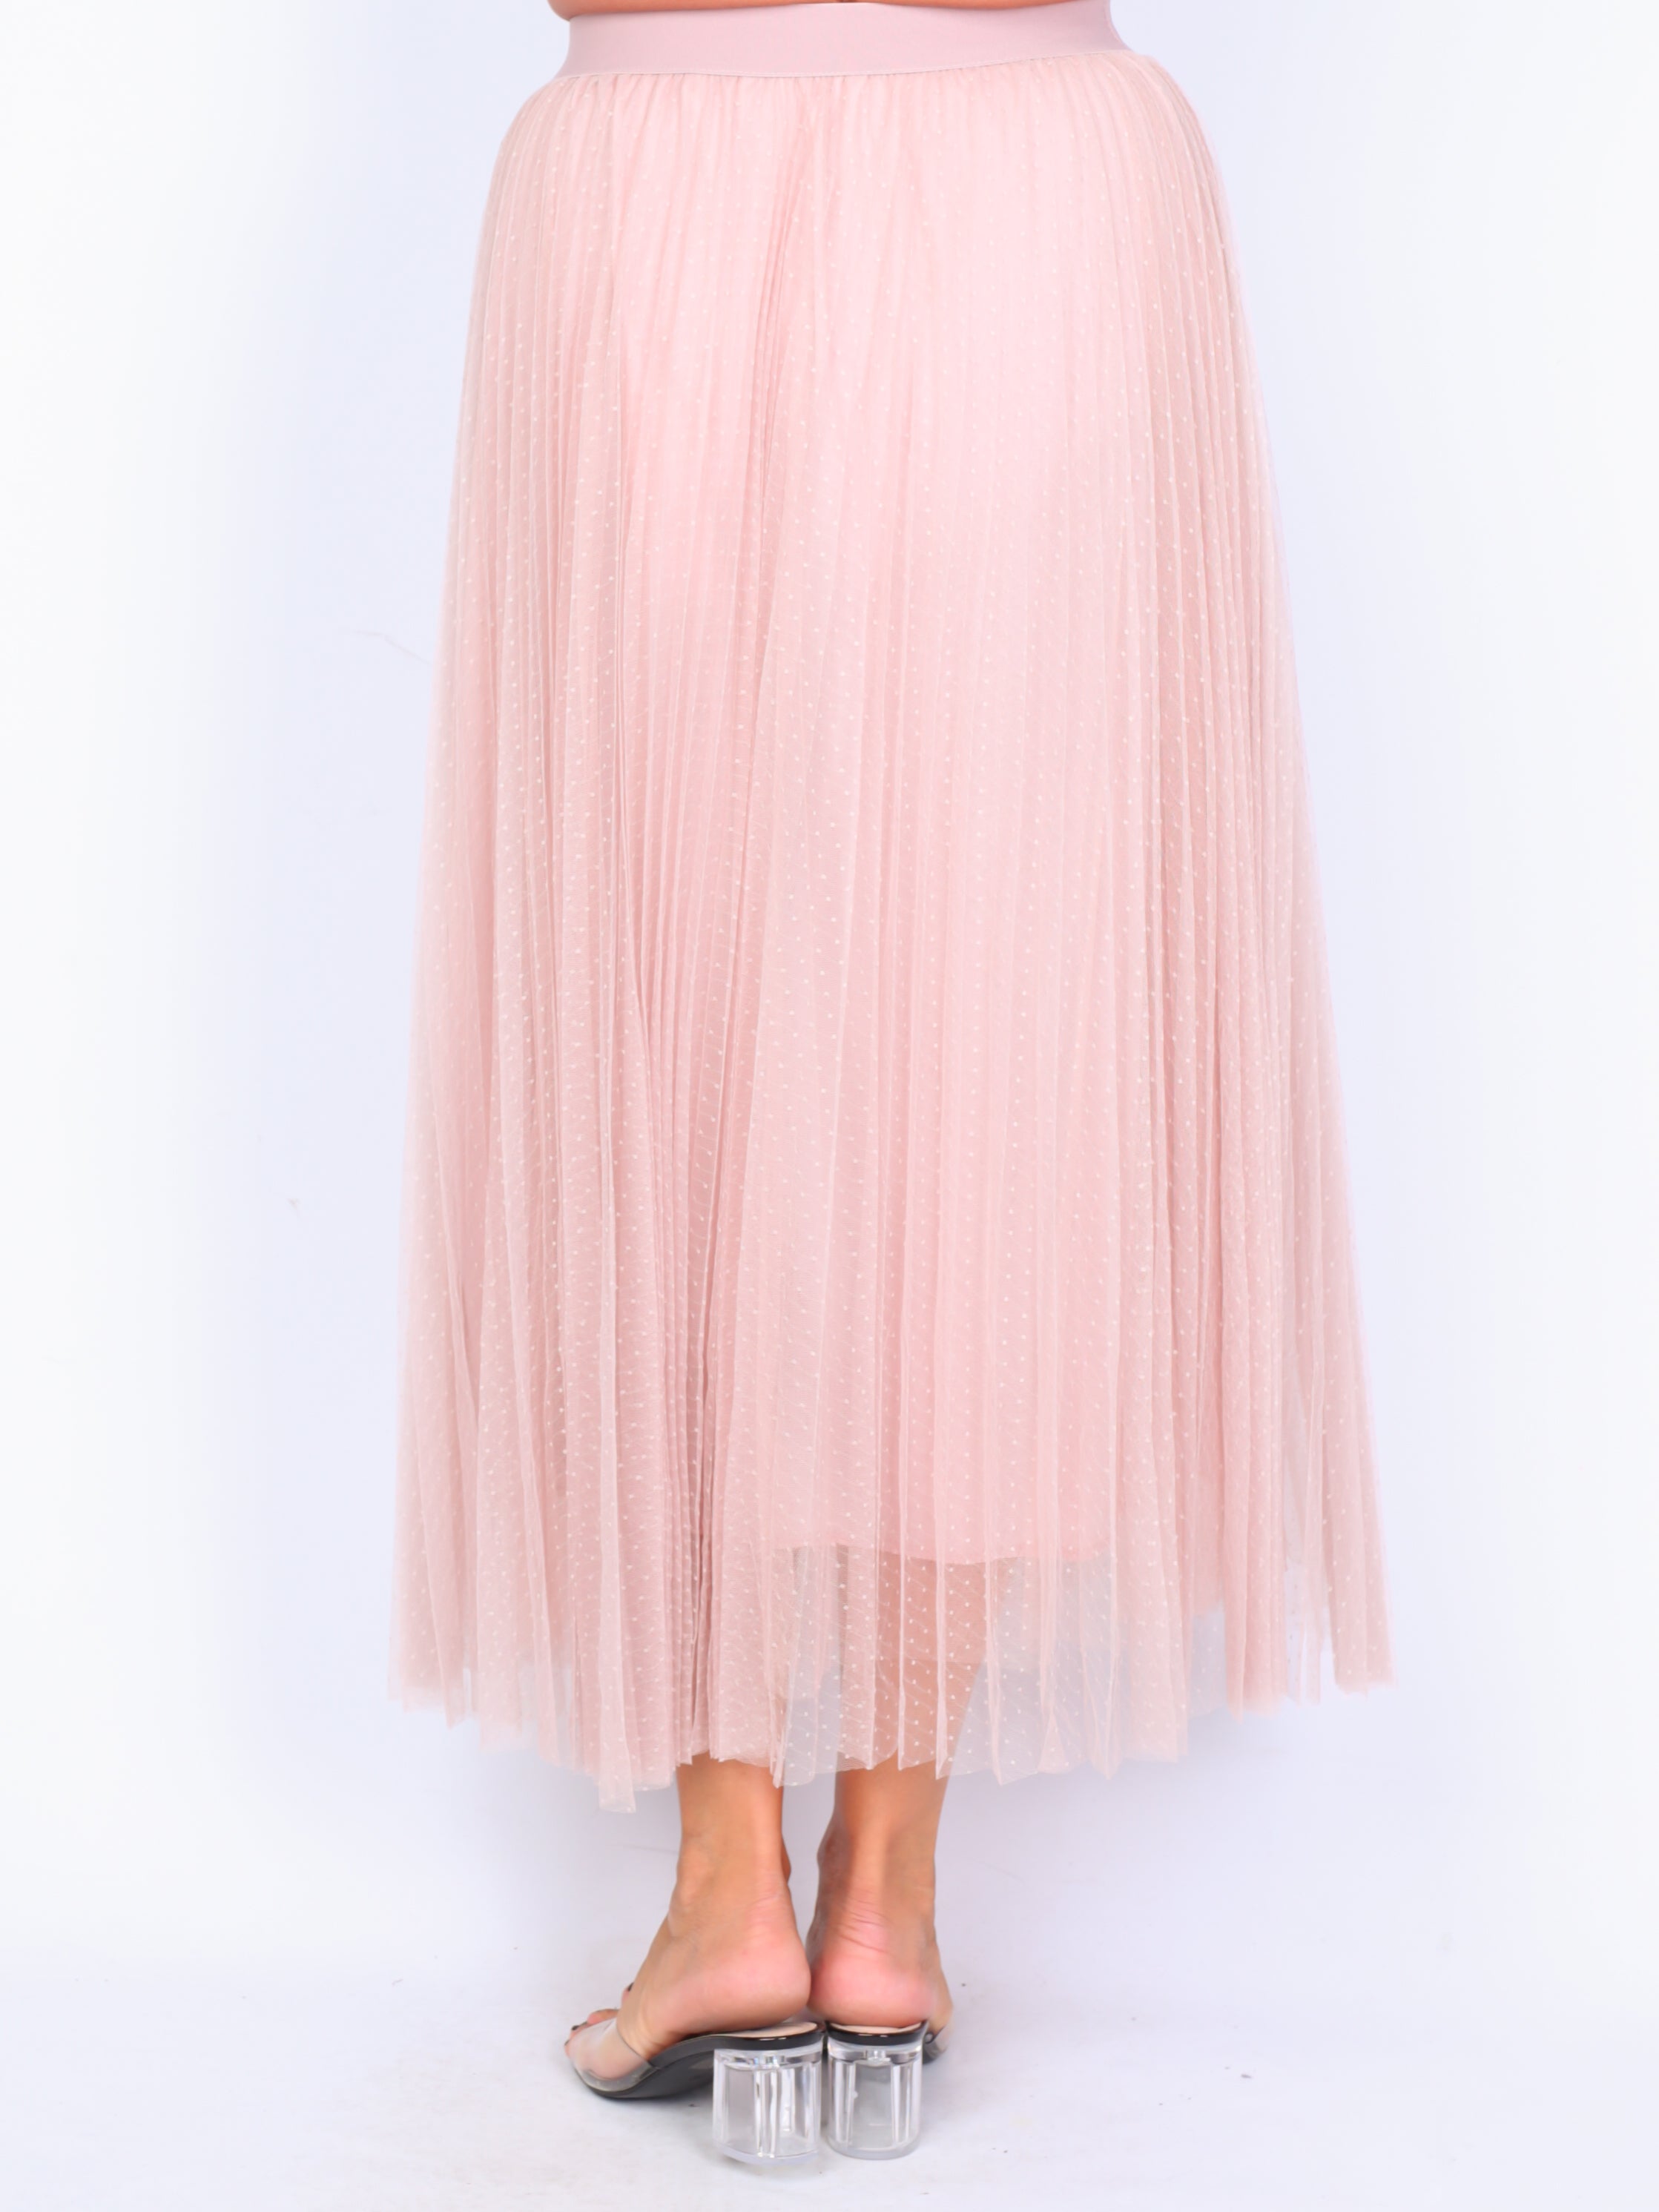 Tulle skirt with dots